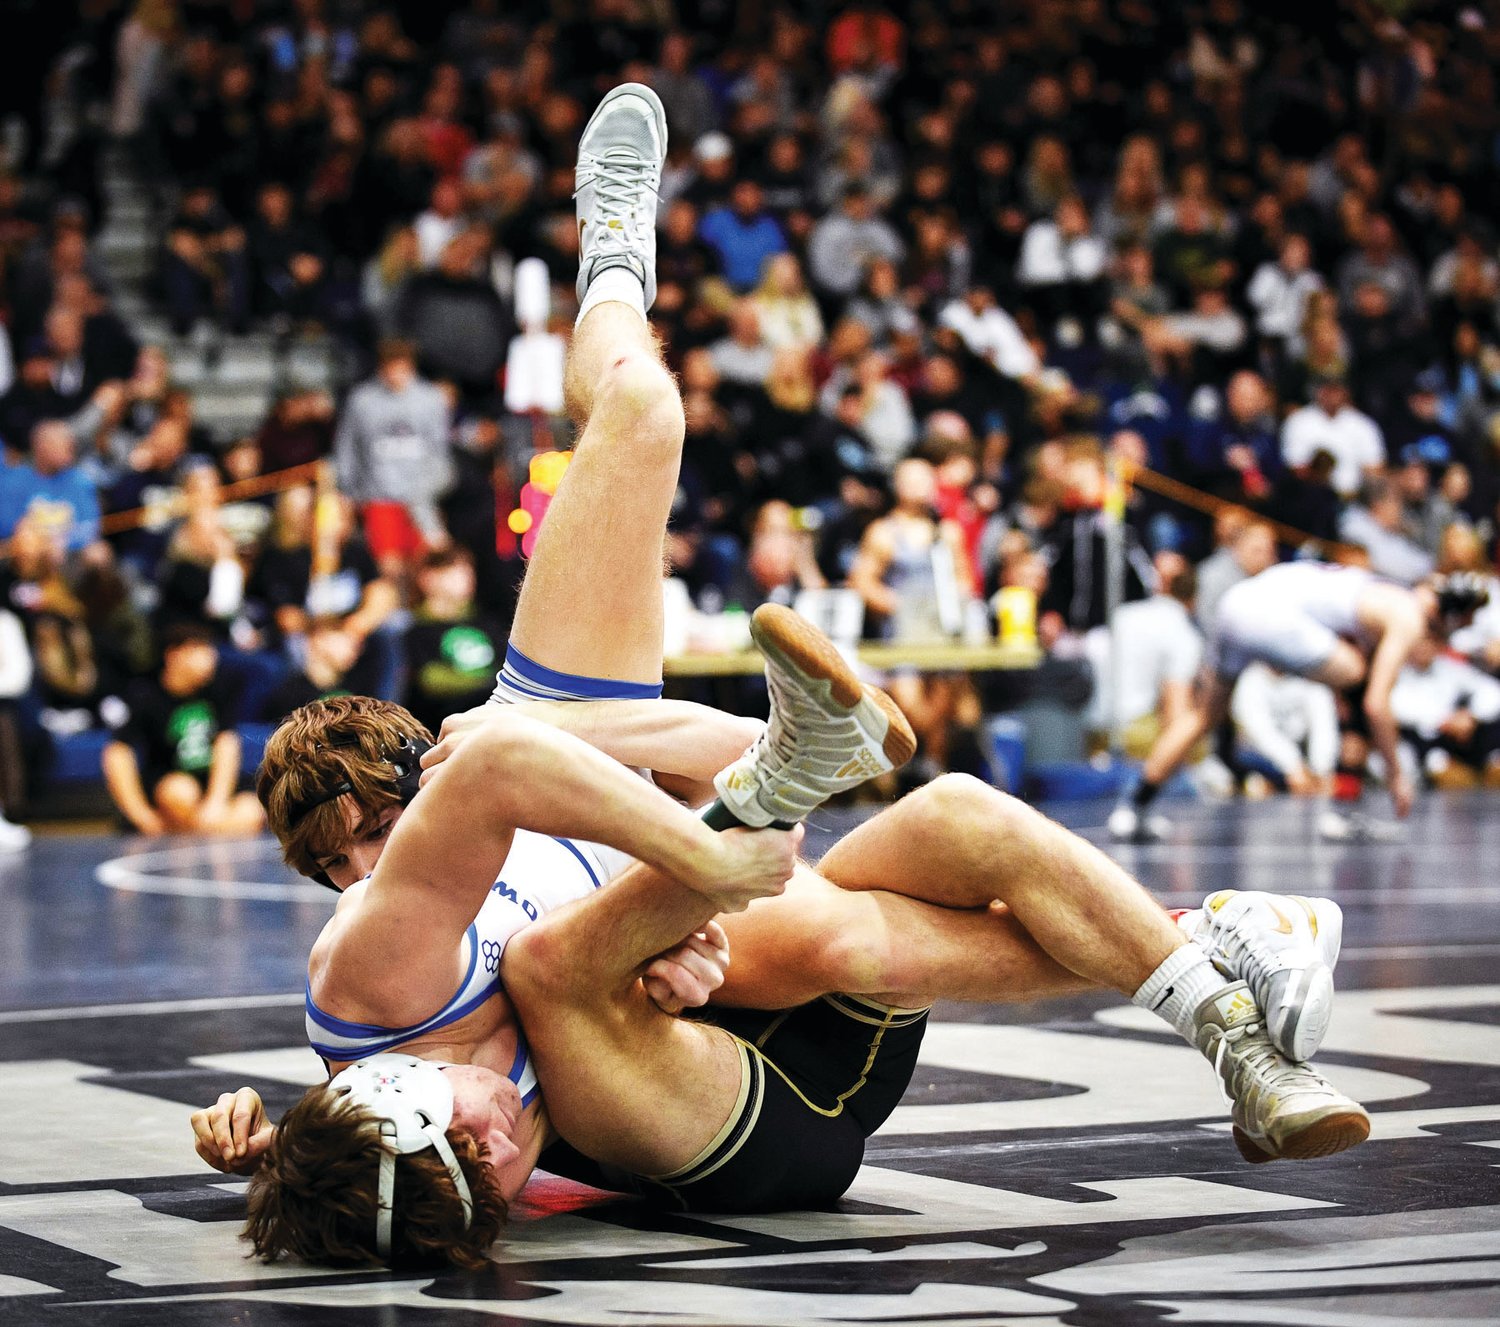 Quakertown’s Todd McGann gets flipped over by Mateo Sgambellone of St. Joseph Regional in the 132-pound weight class. McGann would go on to lose the match by an 8-6 decision.